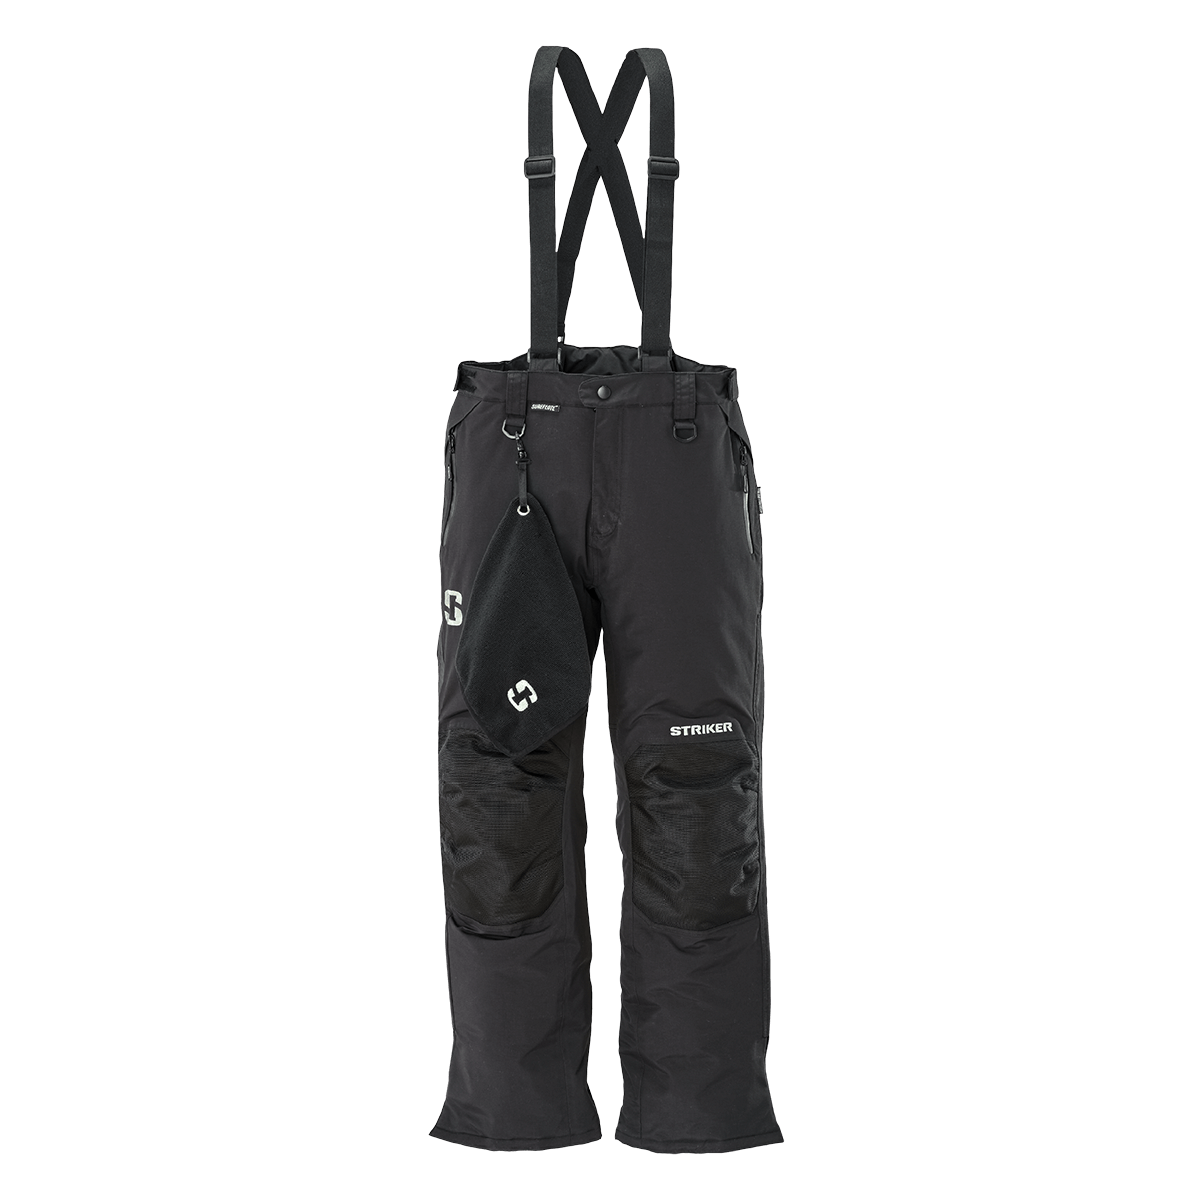 Front View Product Image of StrikerICE Women's Prism Pant